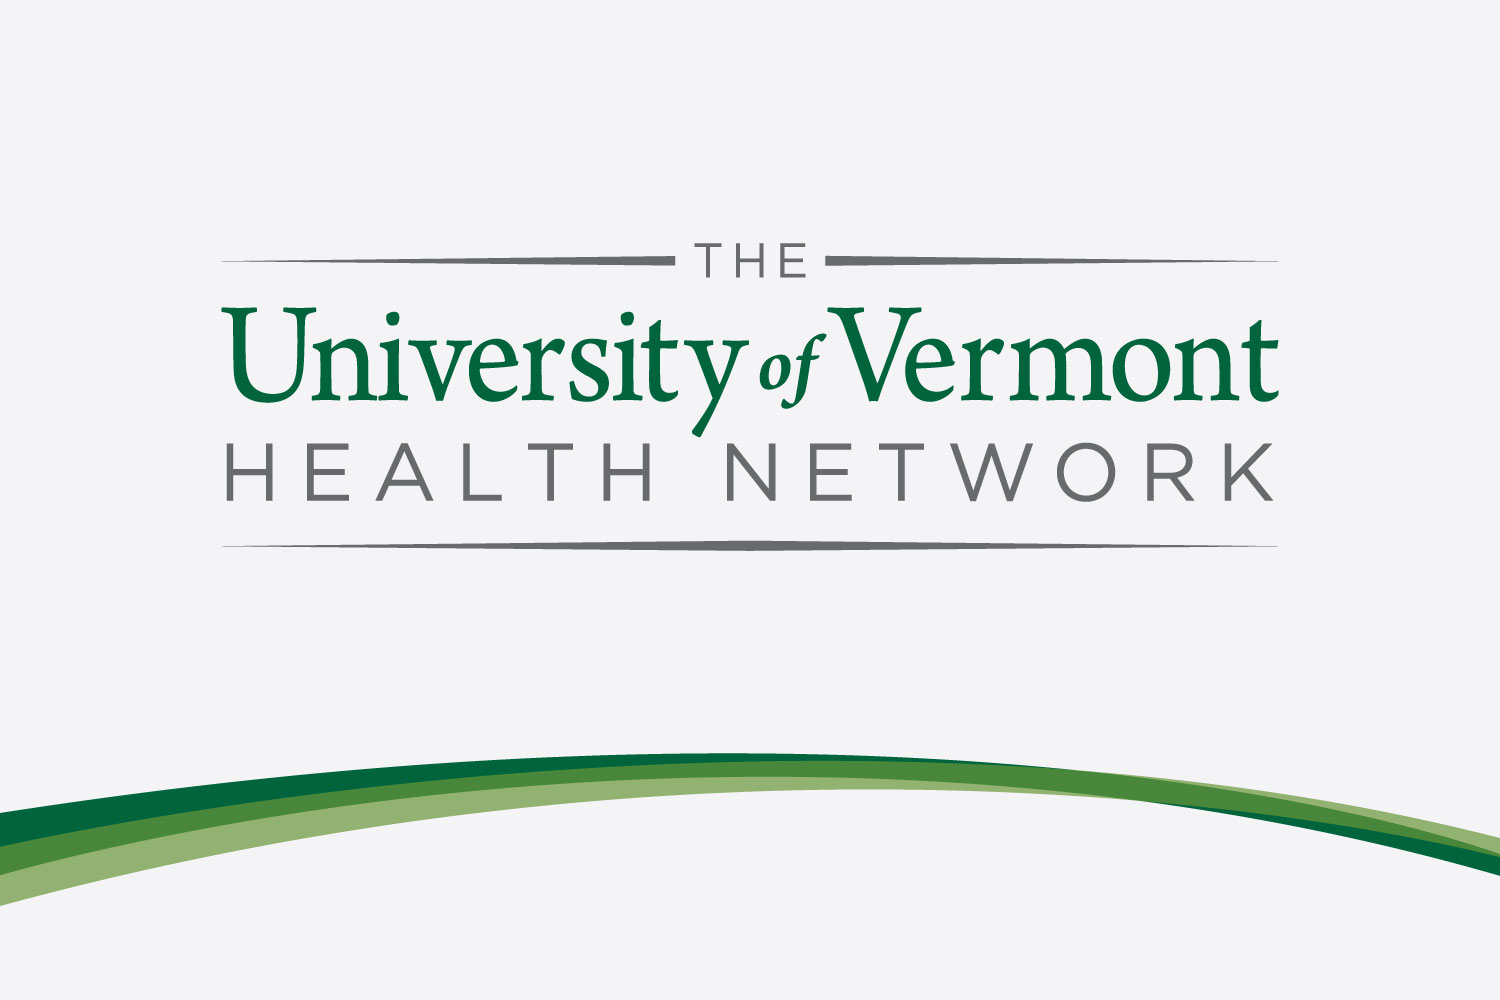 UVM Health Network Outlines Plan to Improve Mental Health Care Access, Reduce Pressure on Inpatient Capacity in Region Image